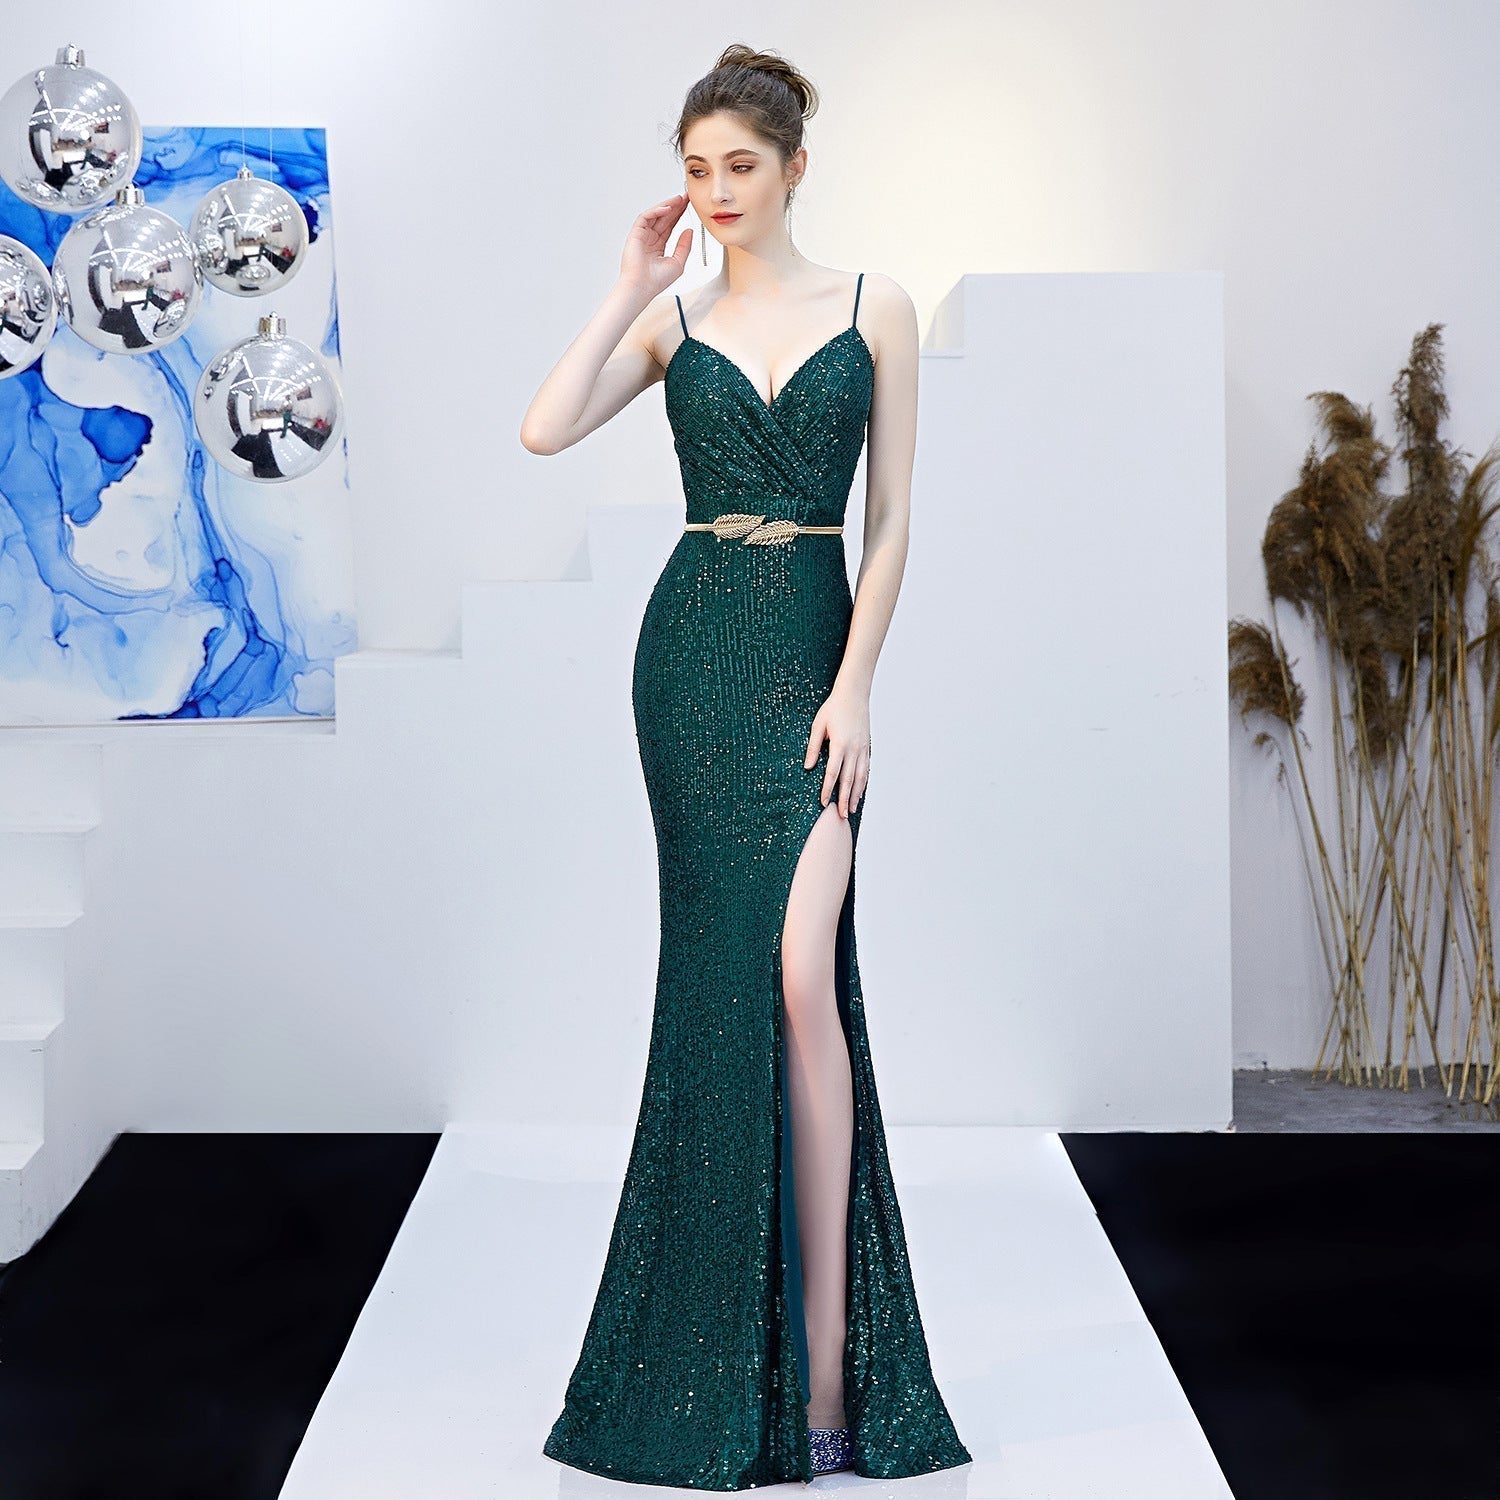 Emma sequined Formal slit dress - Lady Occasions